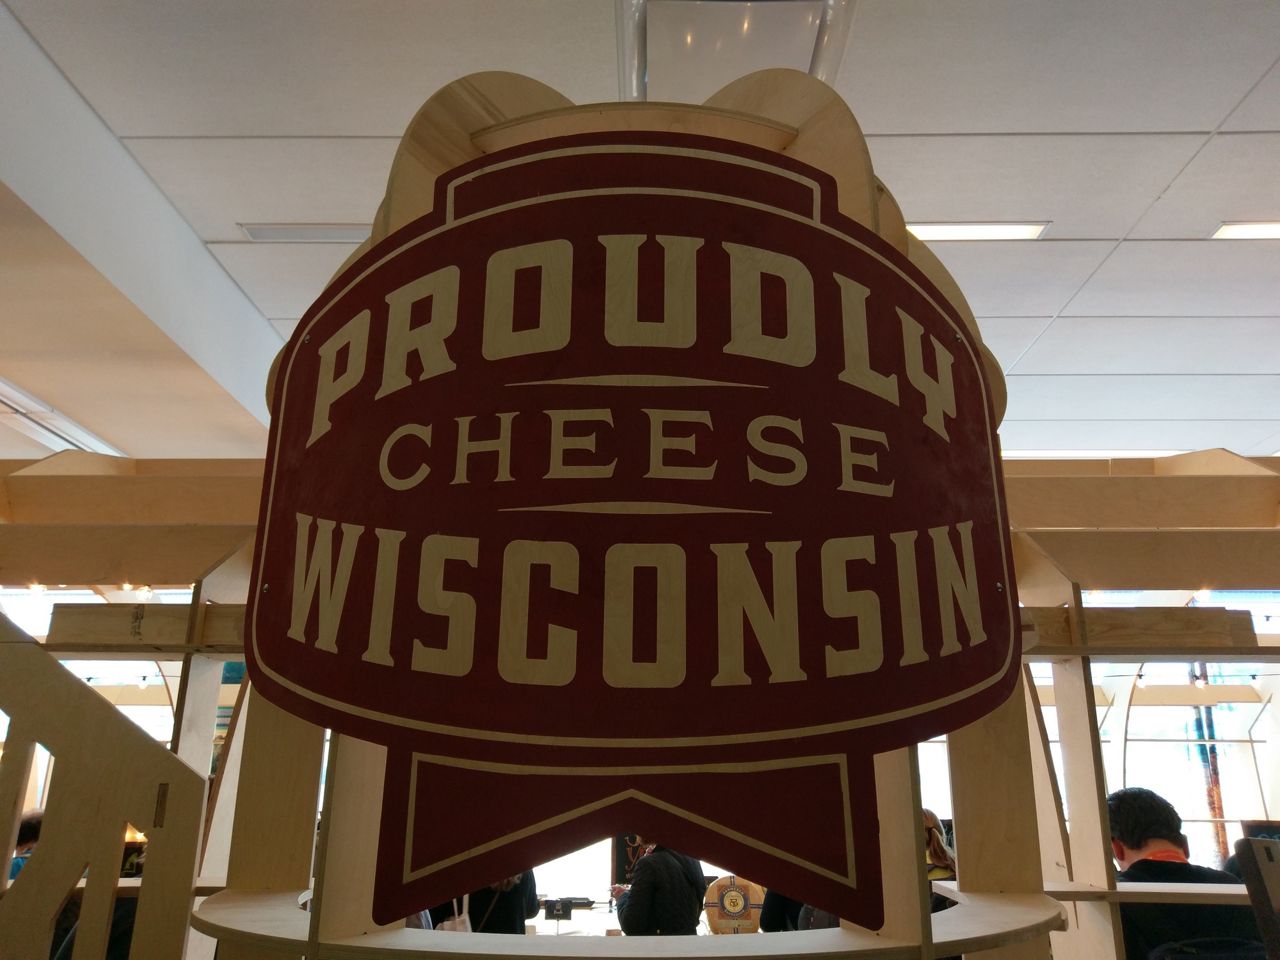 Proudly Cheese Wisconsin